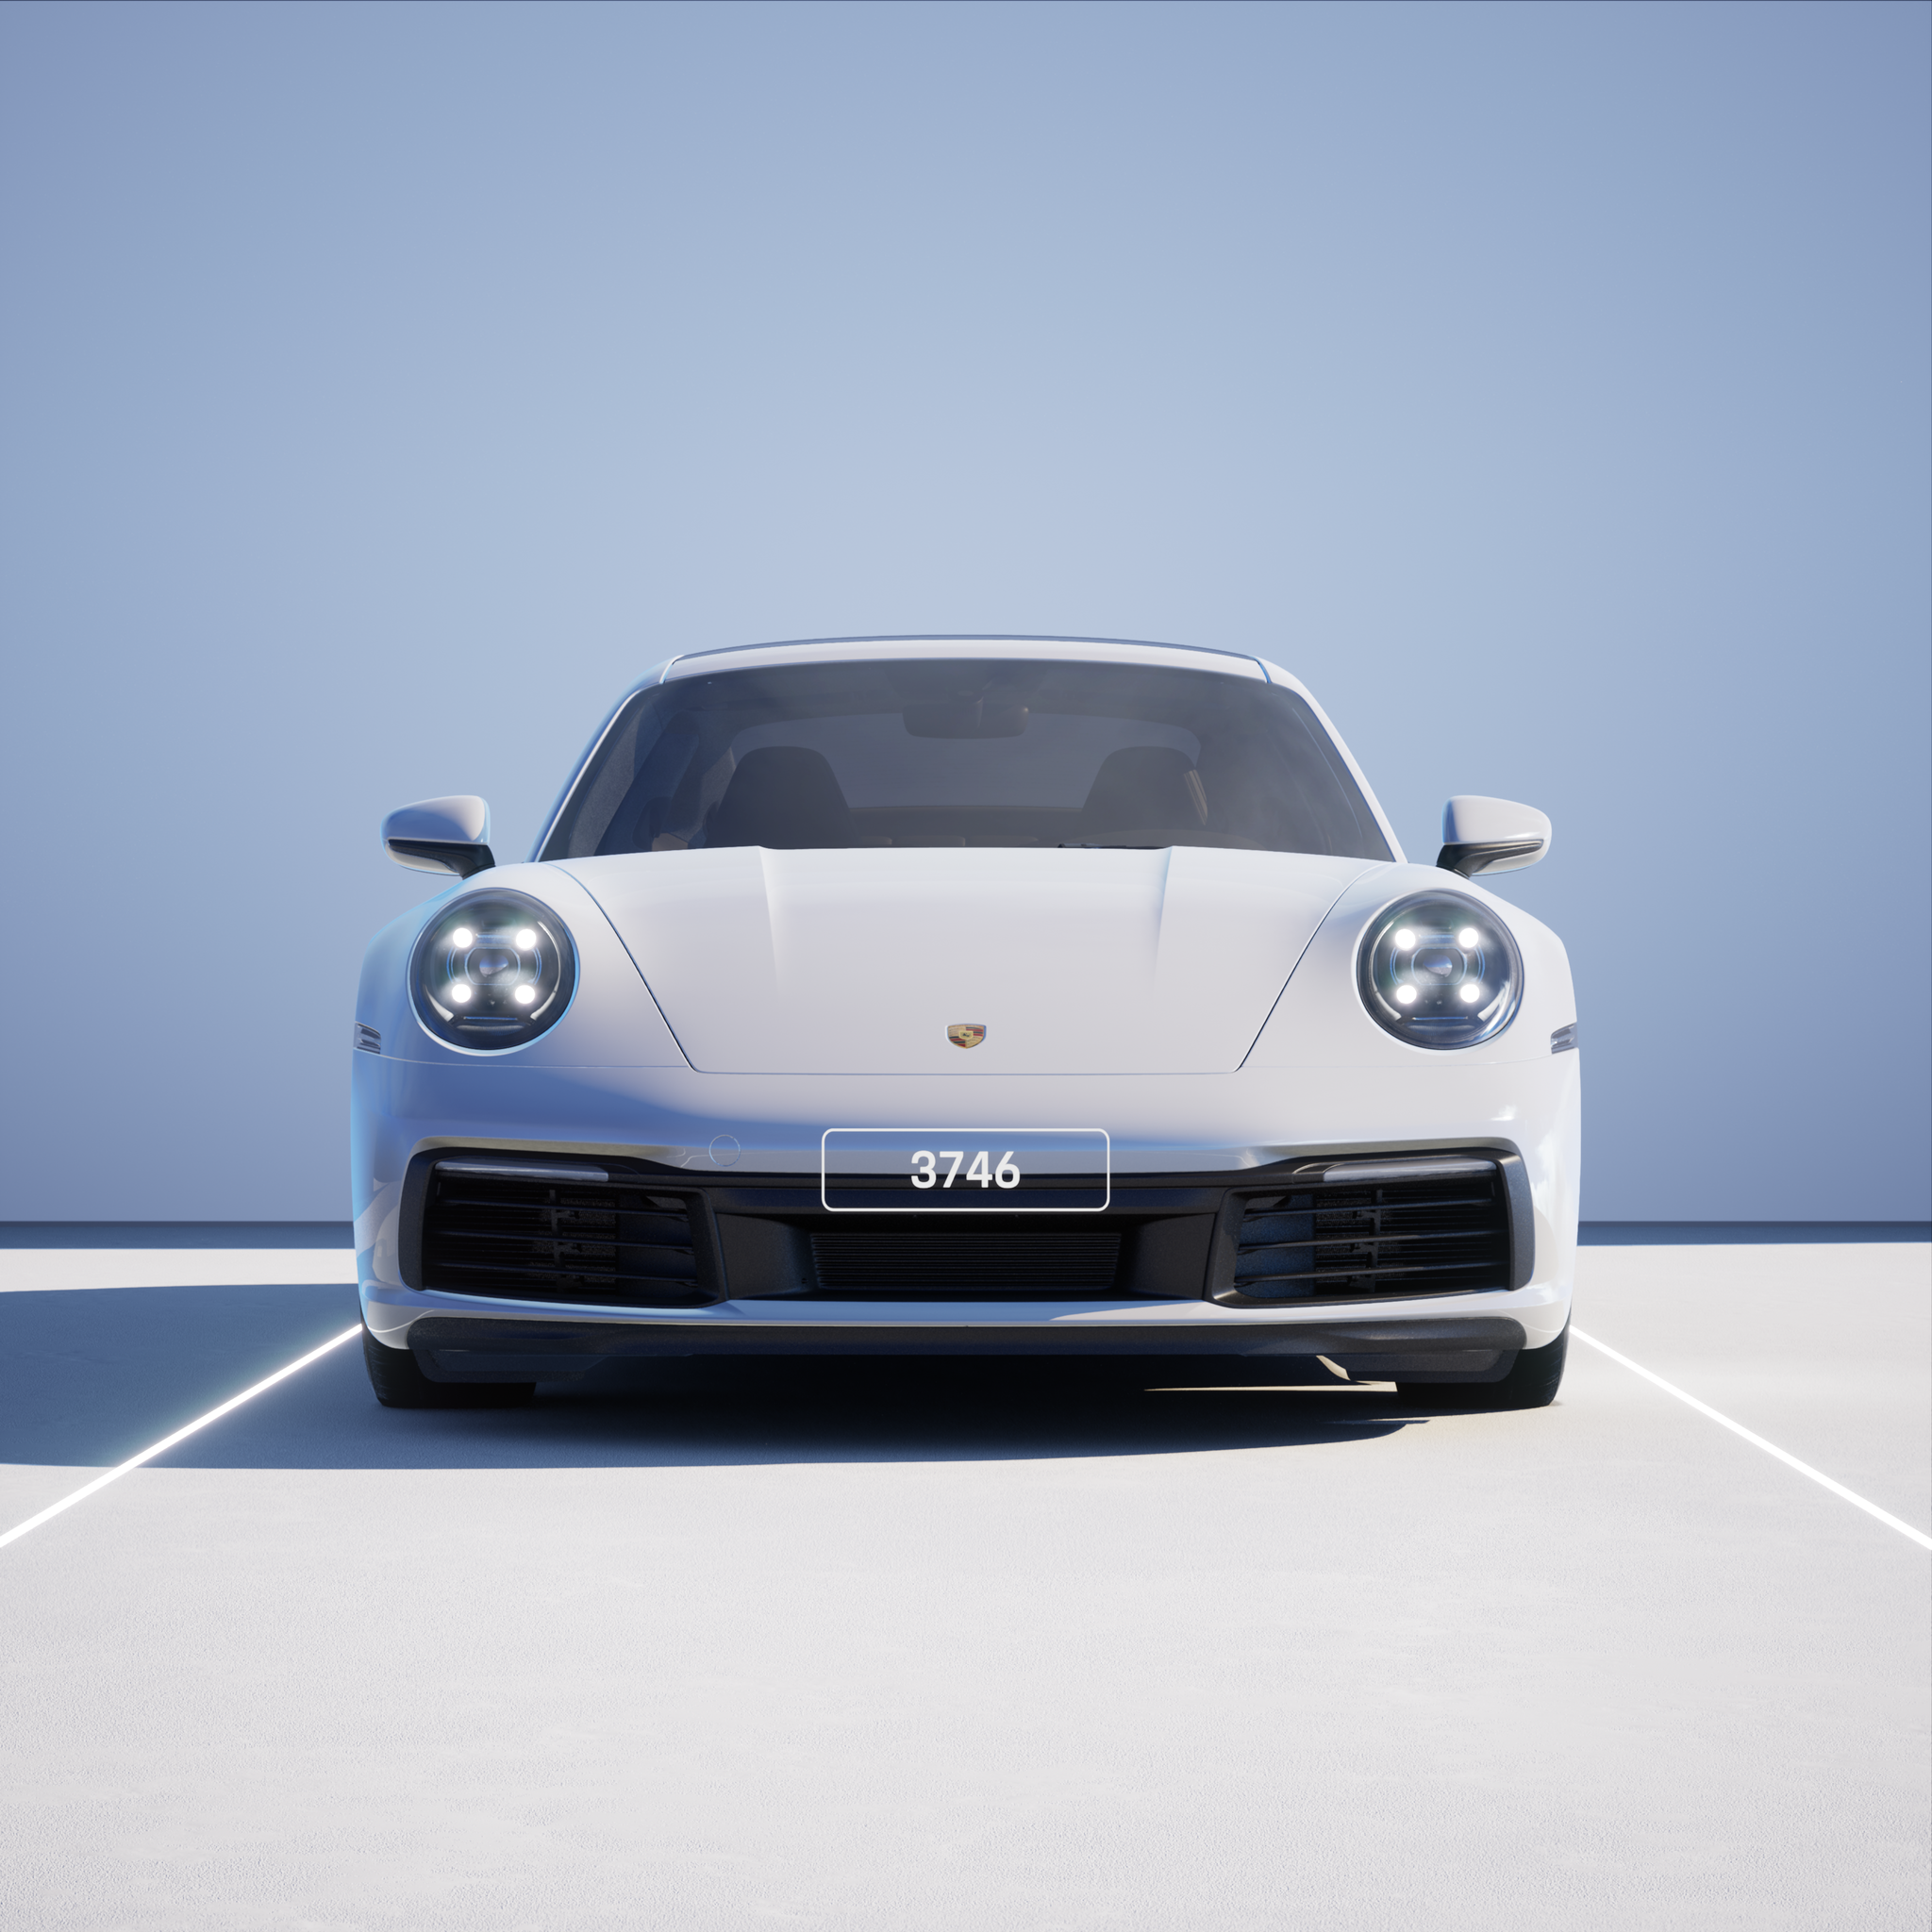 The PORSCHΞ 911 3746 image in phase